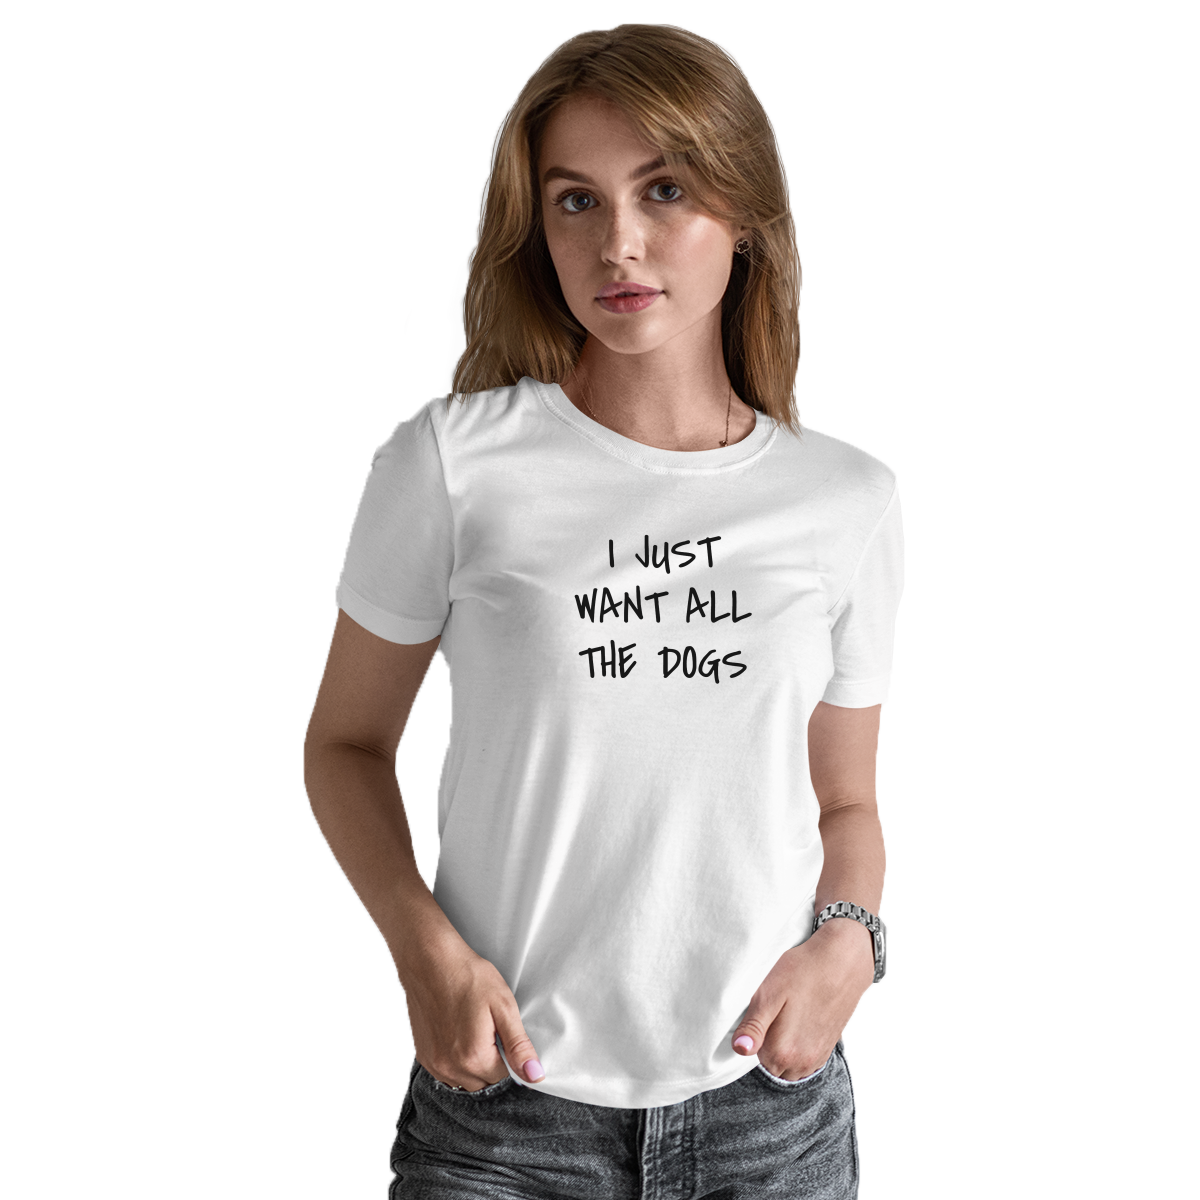 I Just Want All the Dogs Women's T-shirt | White